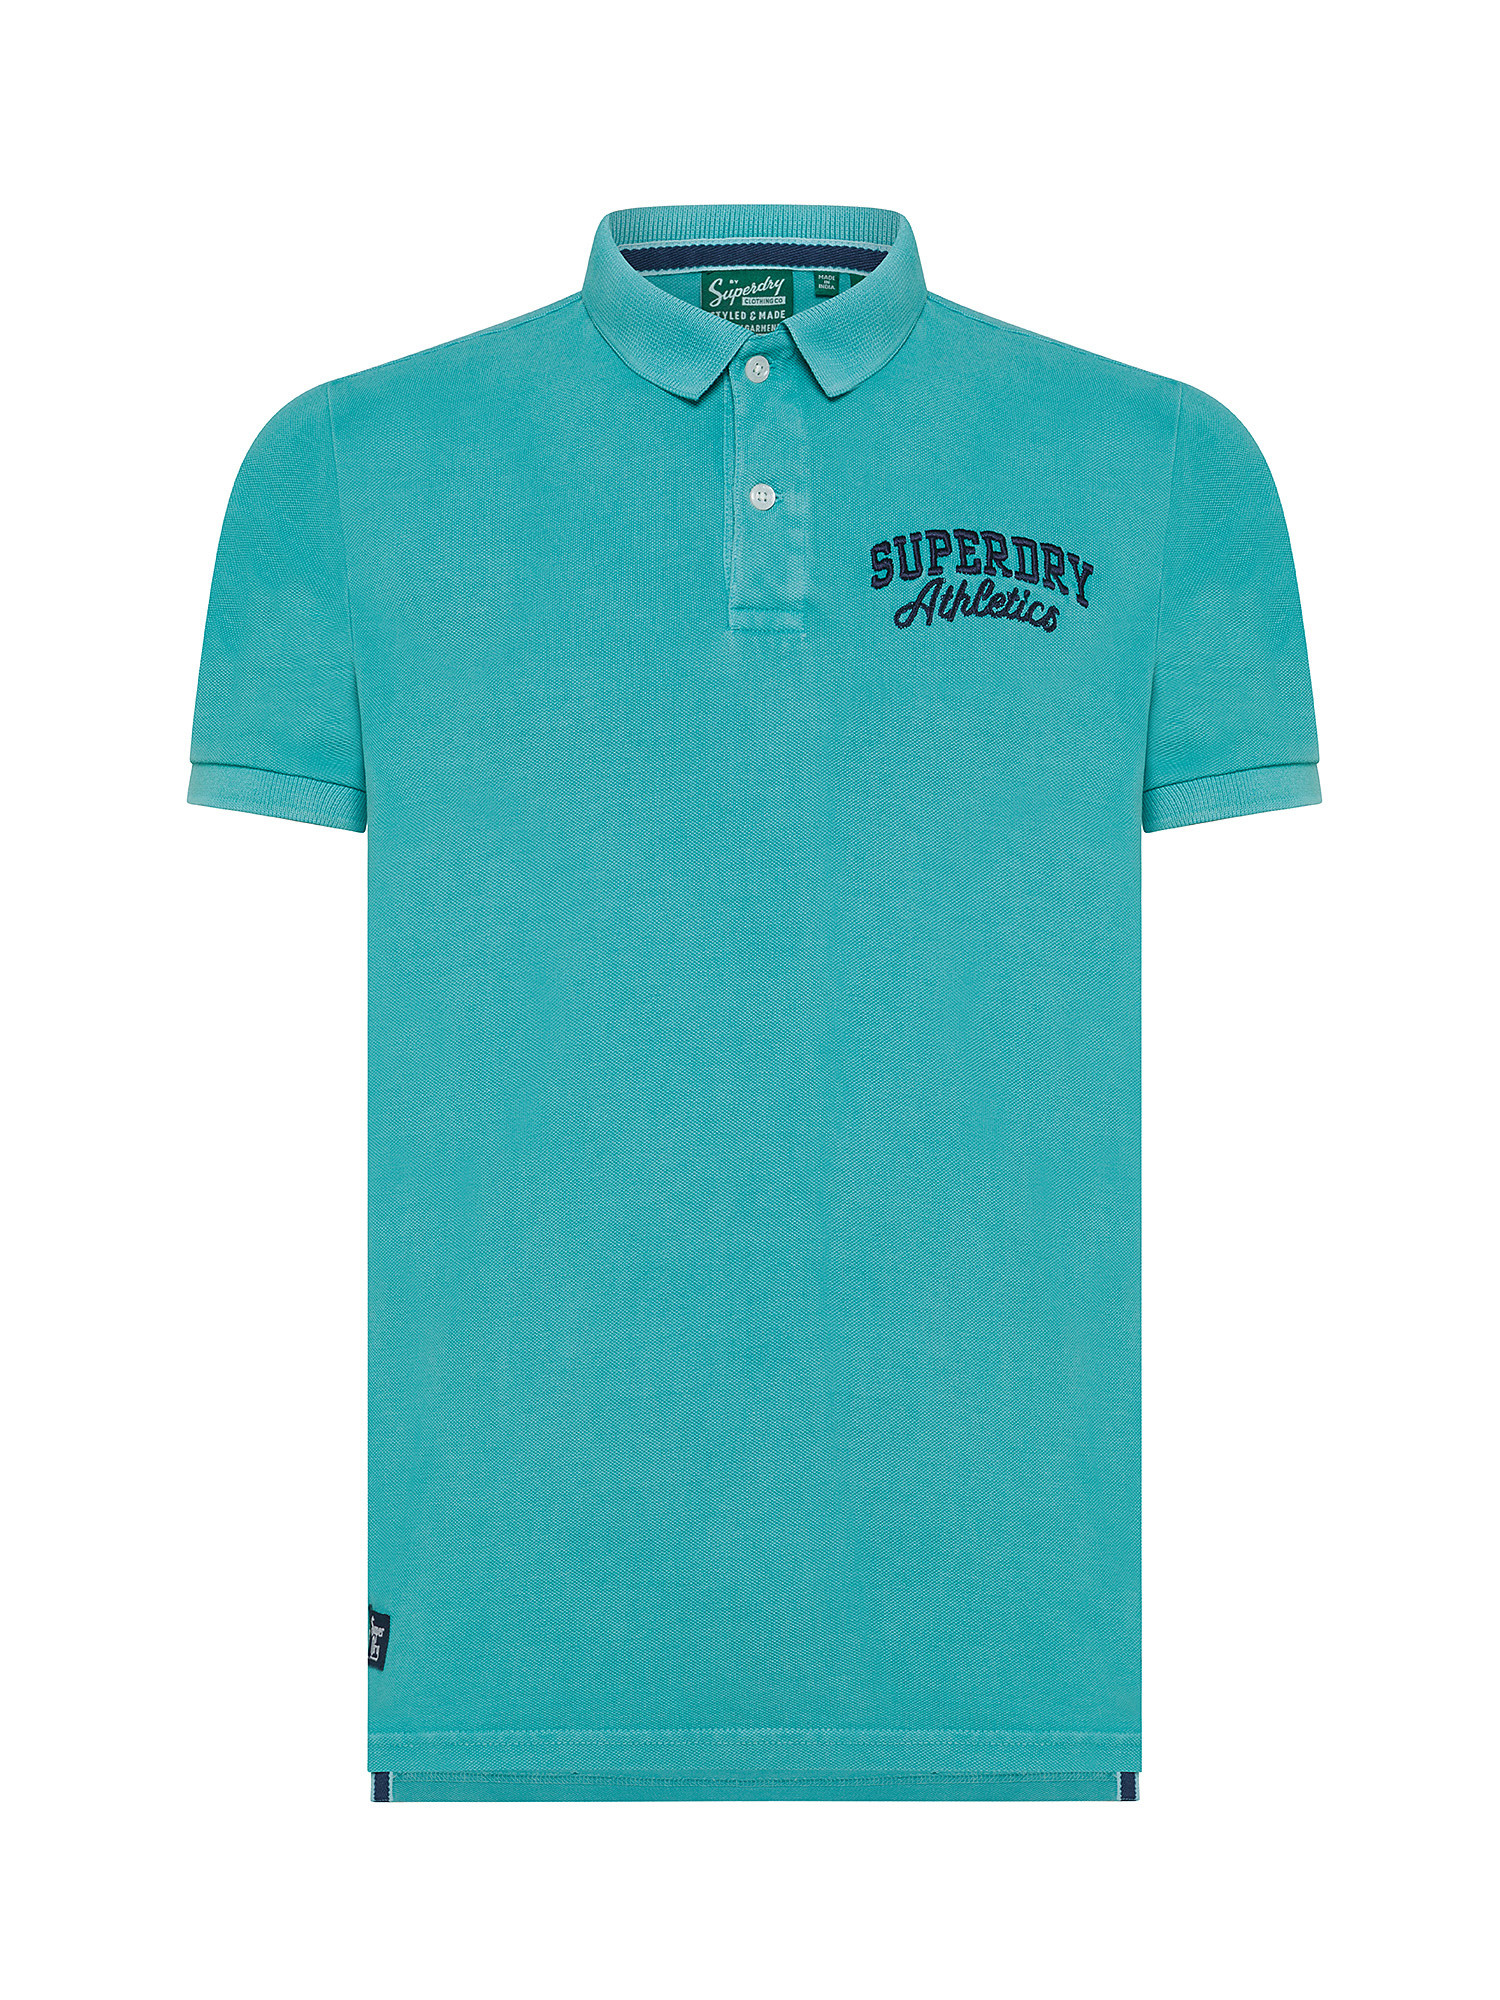 Superdry - Polo in cotone piquet con logo, Azzurro, large image number 0